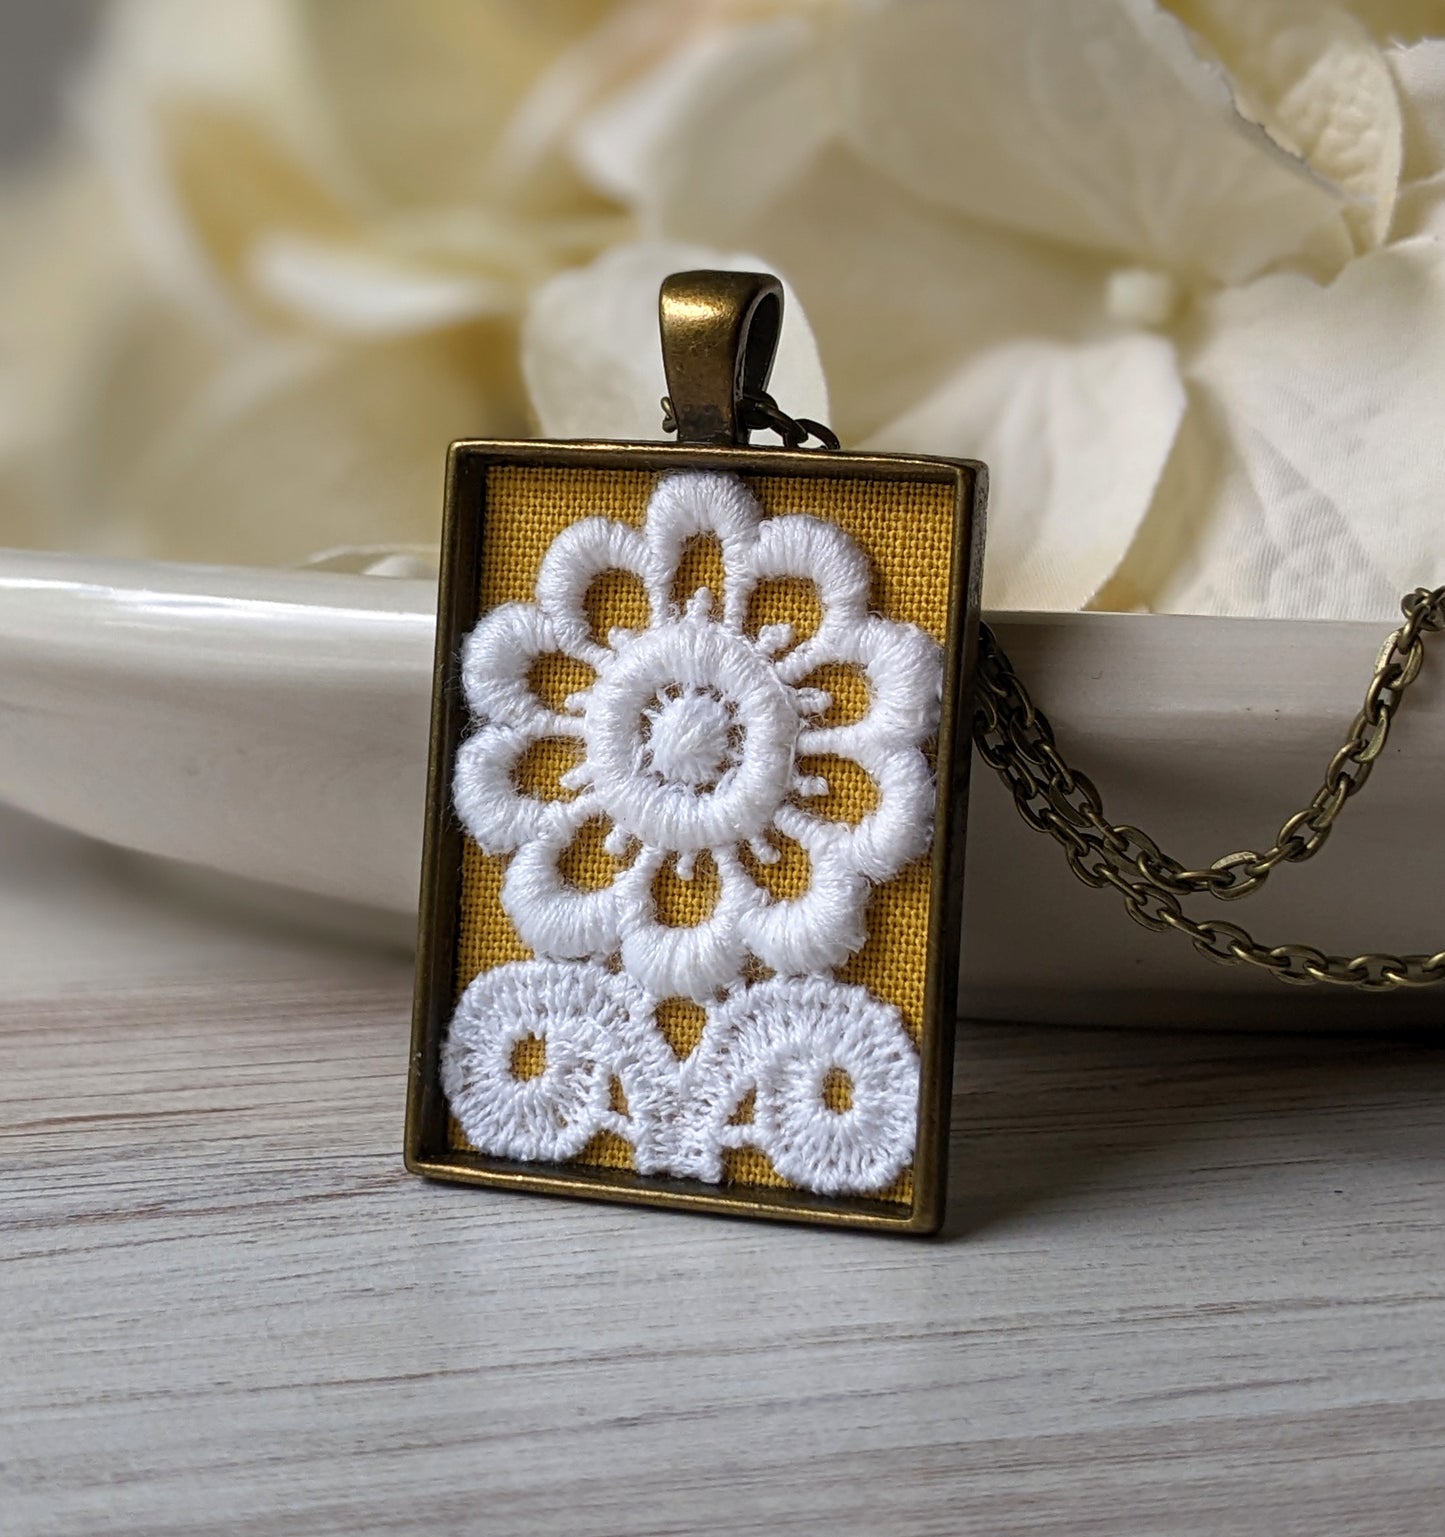 Sunny Daisy Pendant With Vintage Lace, Mustard Yellow Fabric